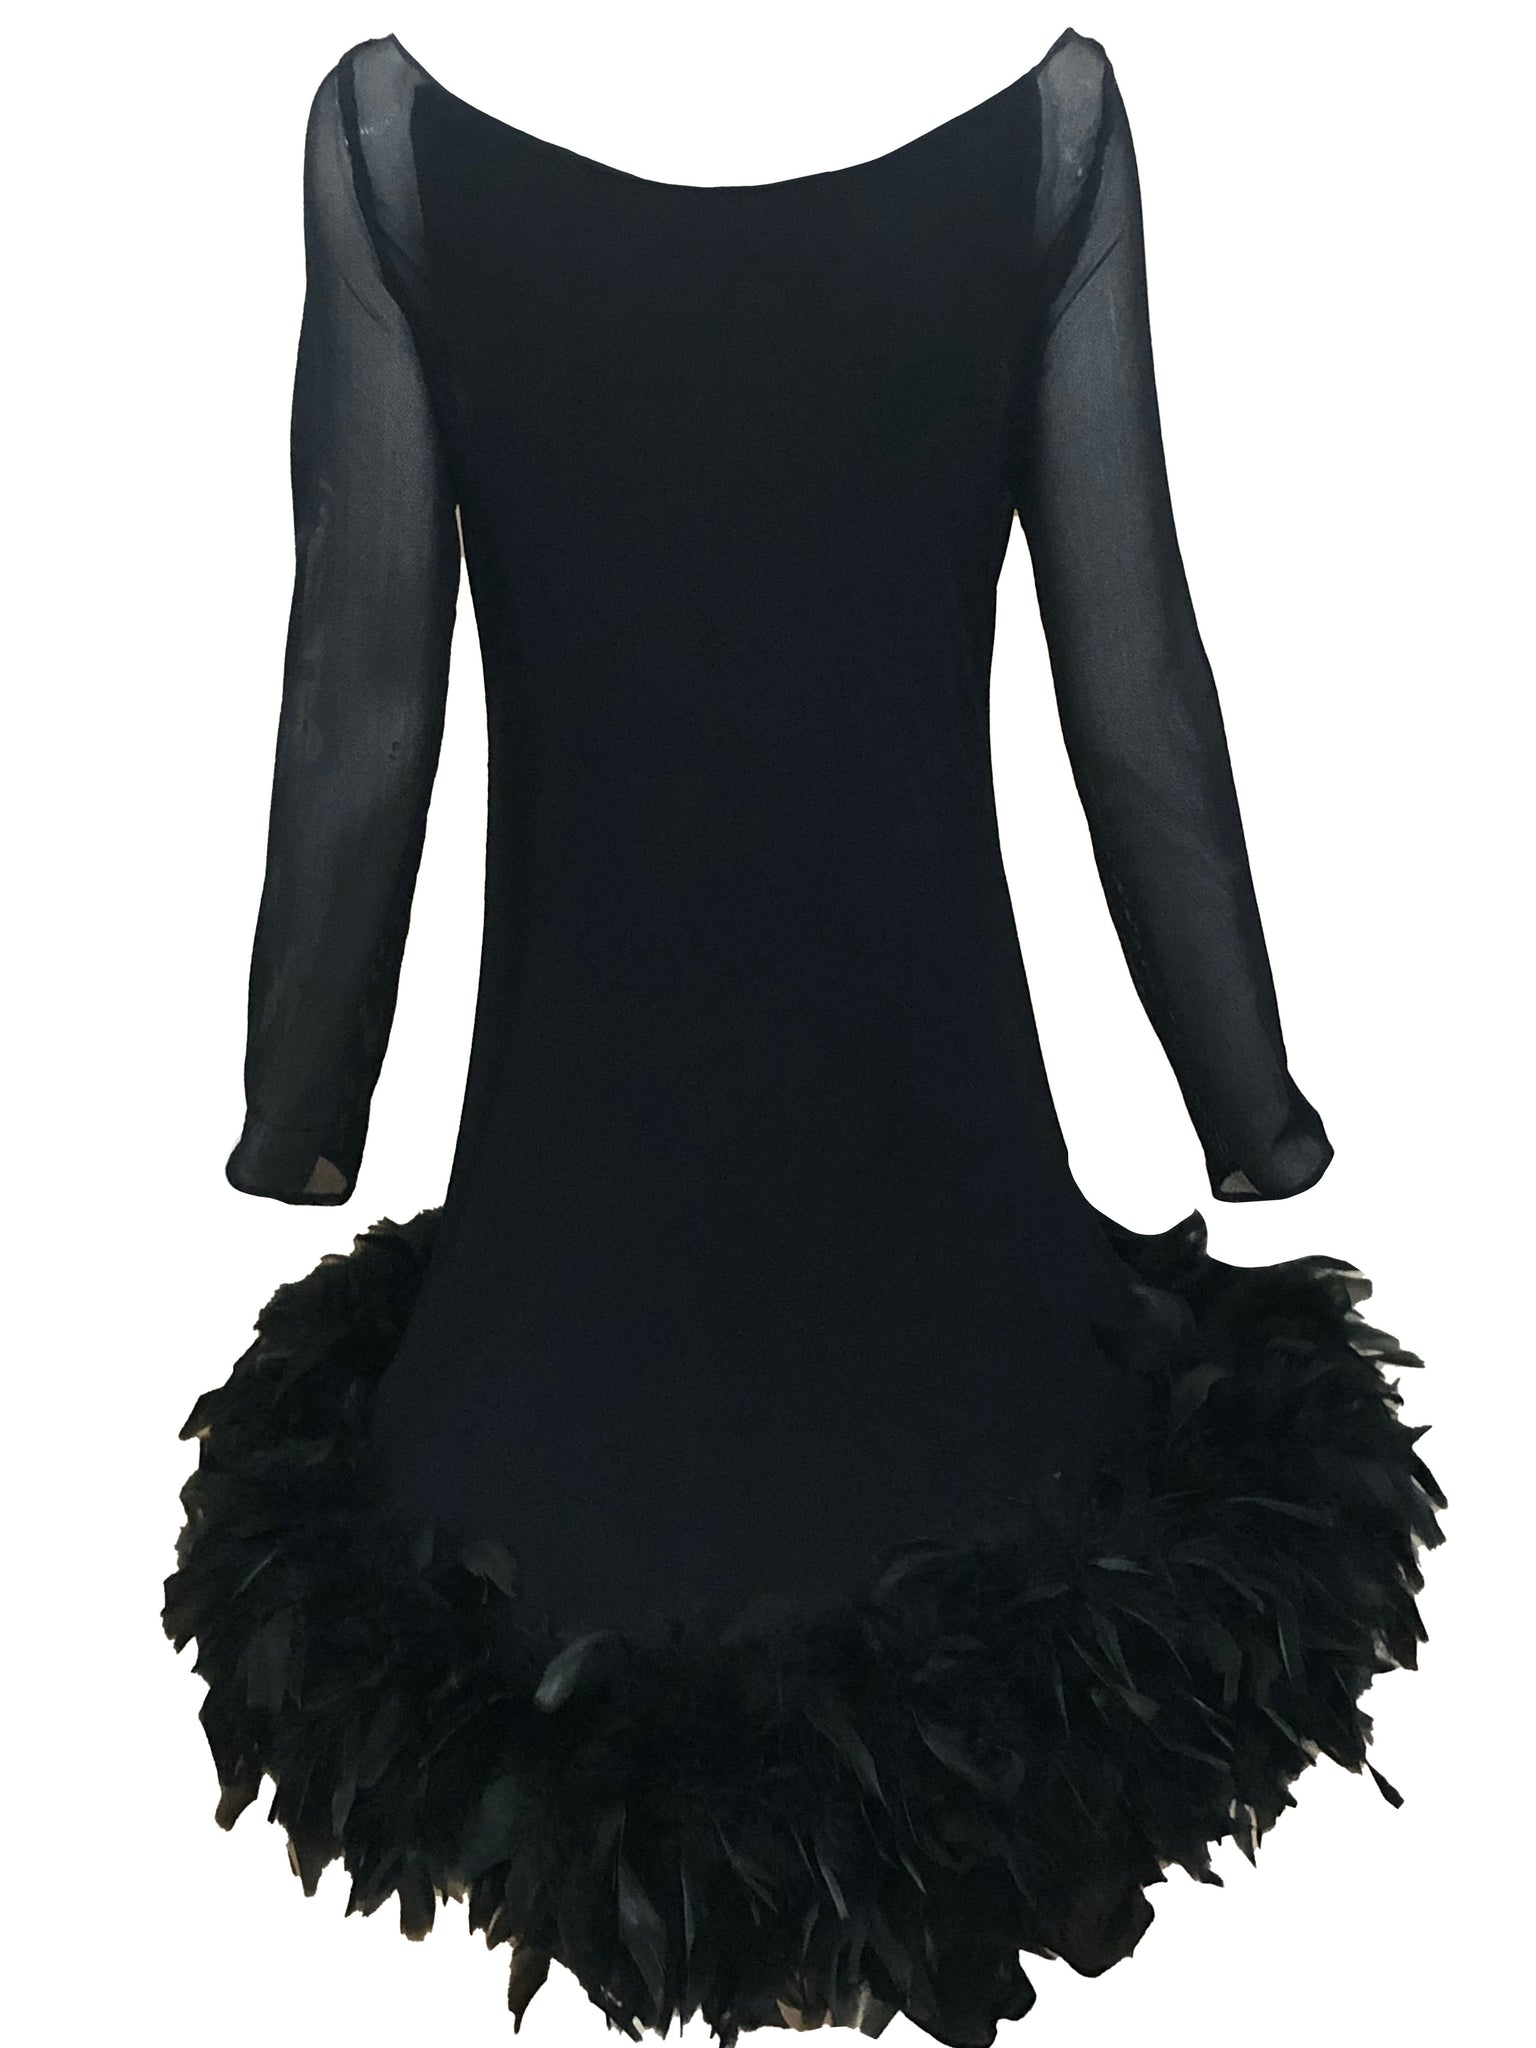 1994 Pierre Cardin Haute Couture Unlabelled Black Mesh Dress with Feathers BACK 3 of 4